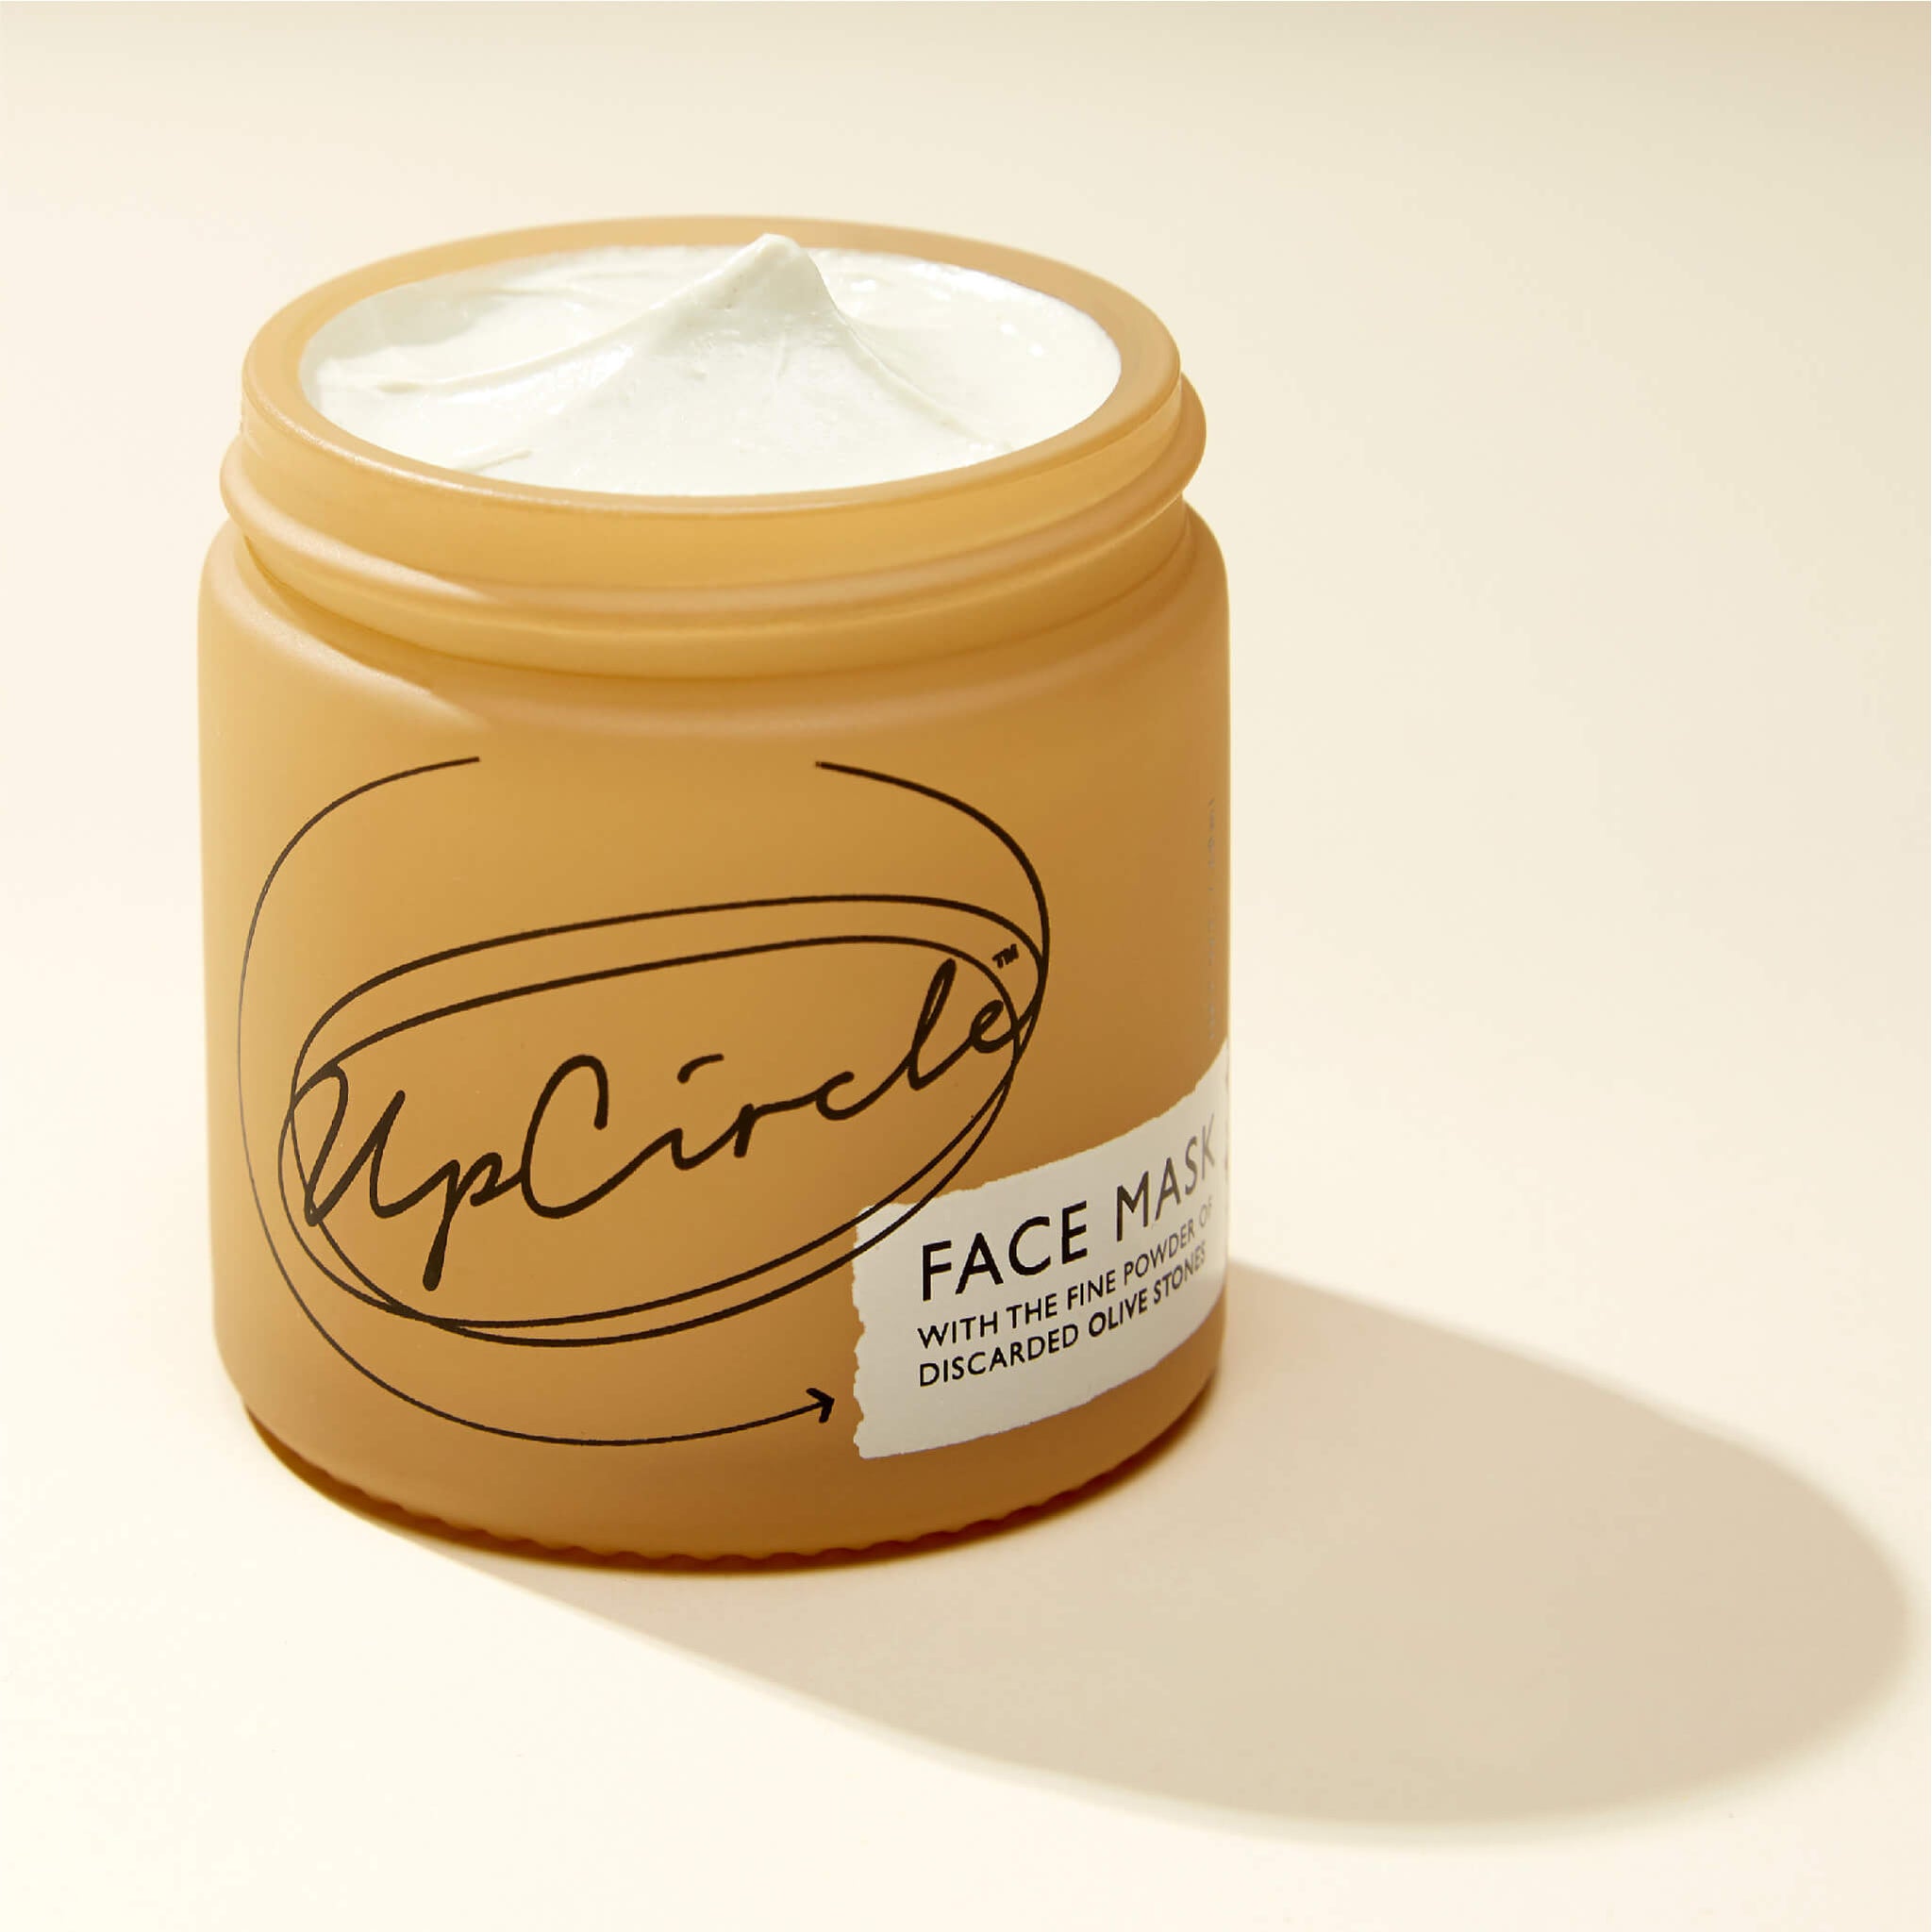 UpCircle face mask jar opened without its lid.